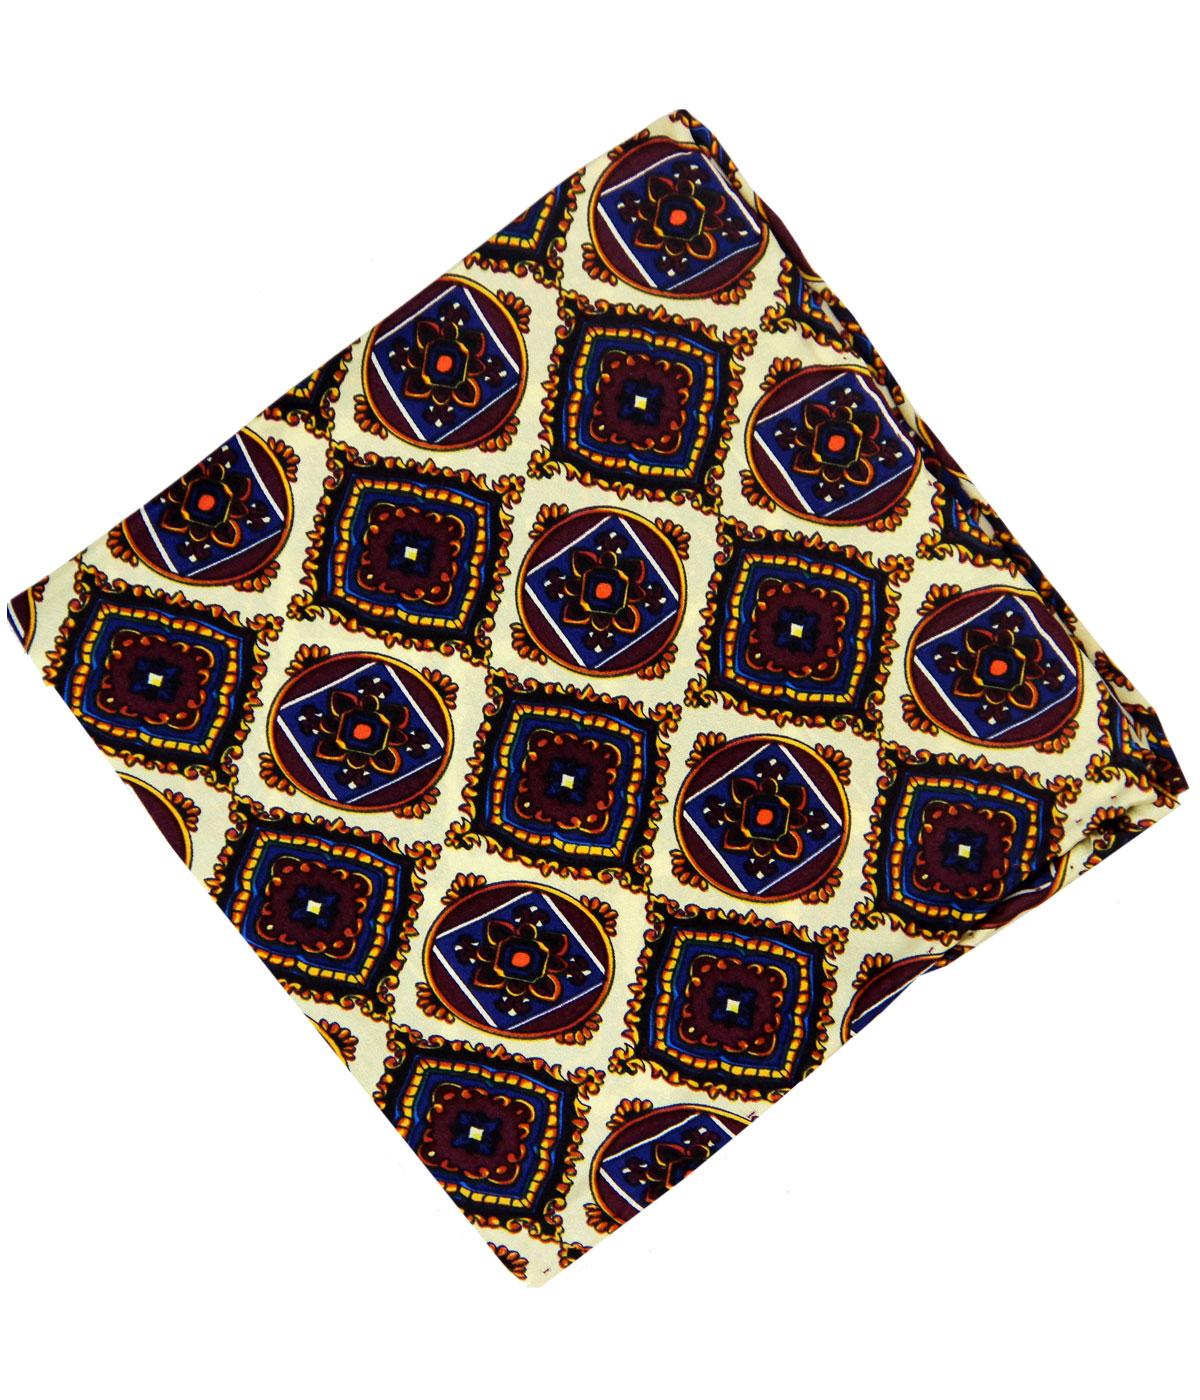 TOOTAL 1960s Mod Floral Mosaic Silk Pocket Square